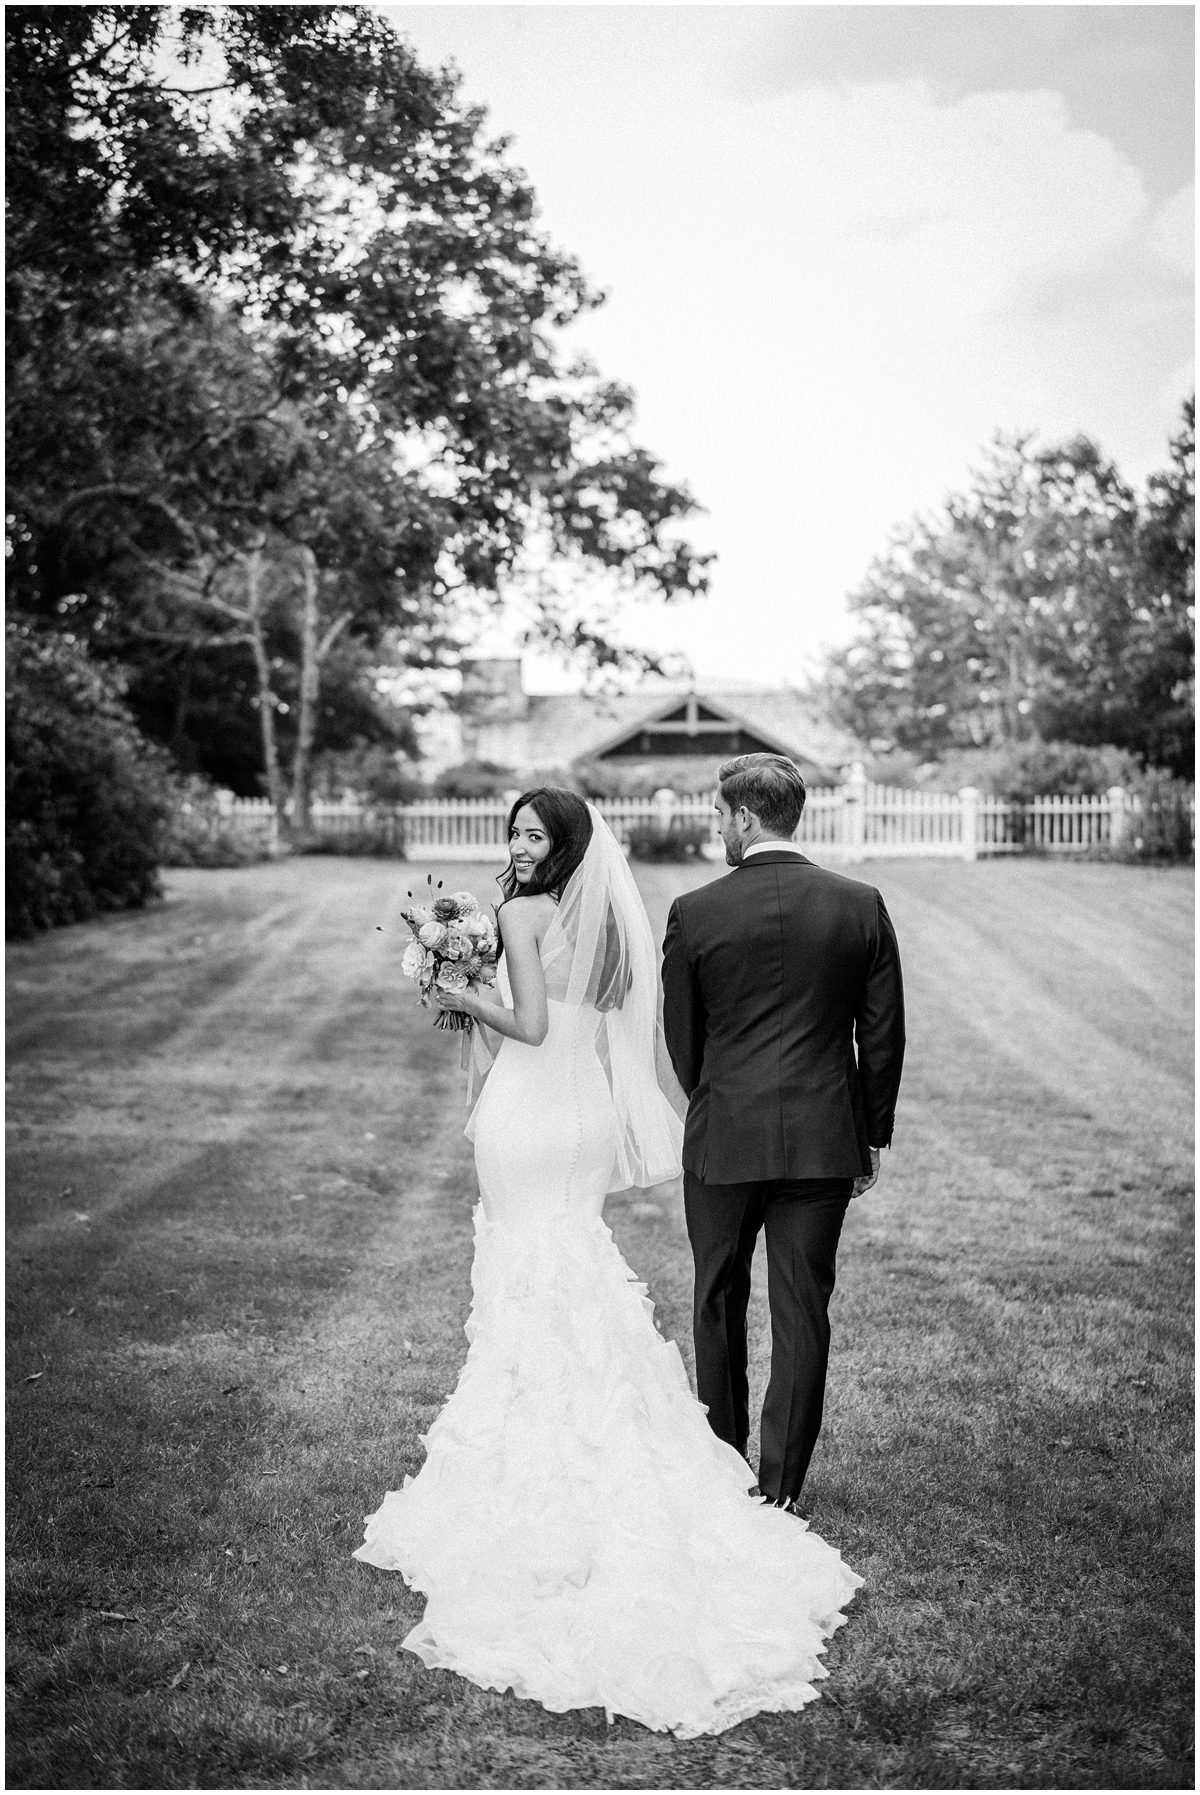 The bride stuns in a form-fitting mermaid gown while the groom rocks a sleek black suit